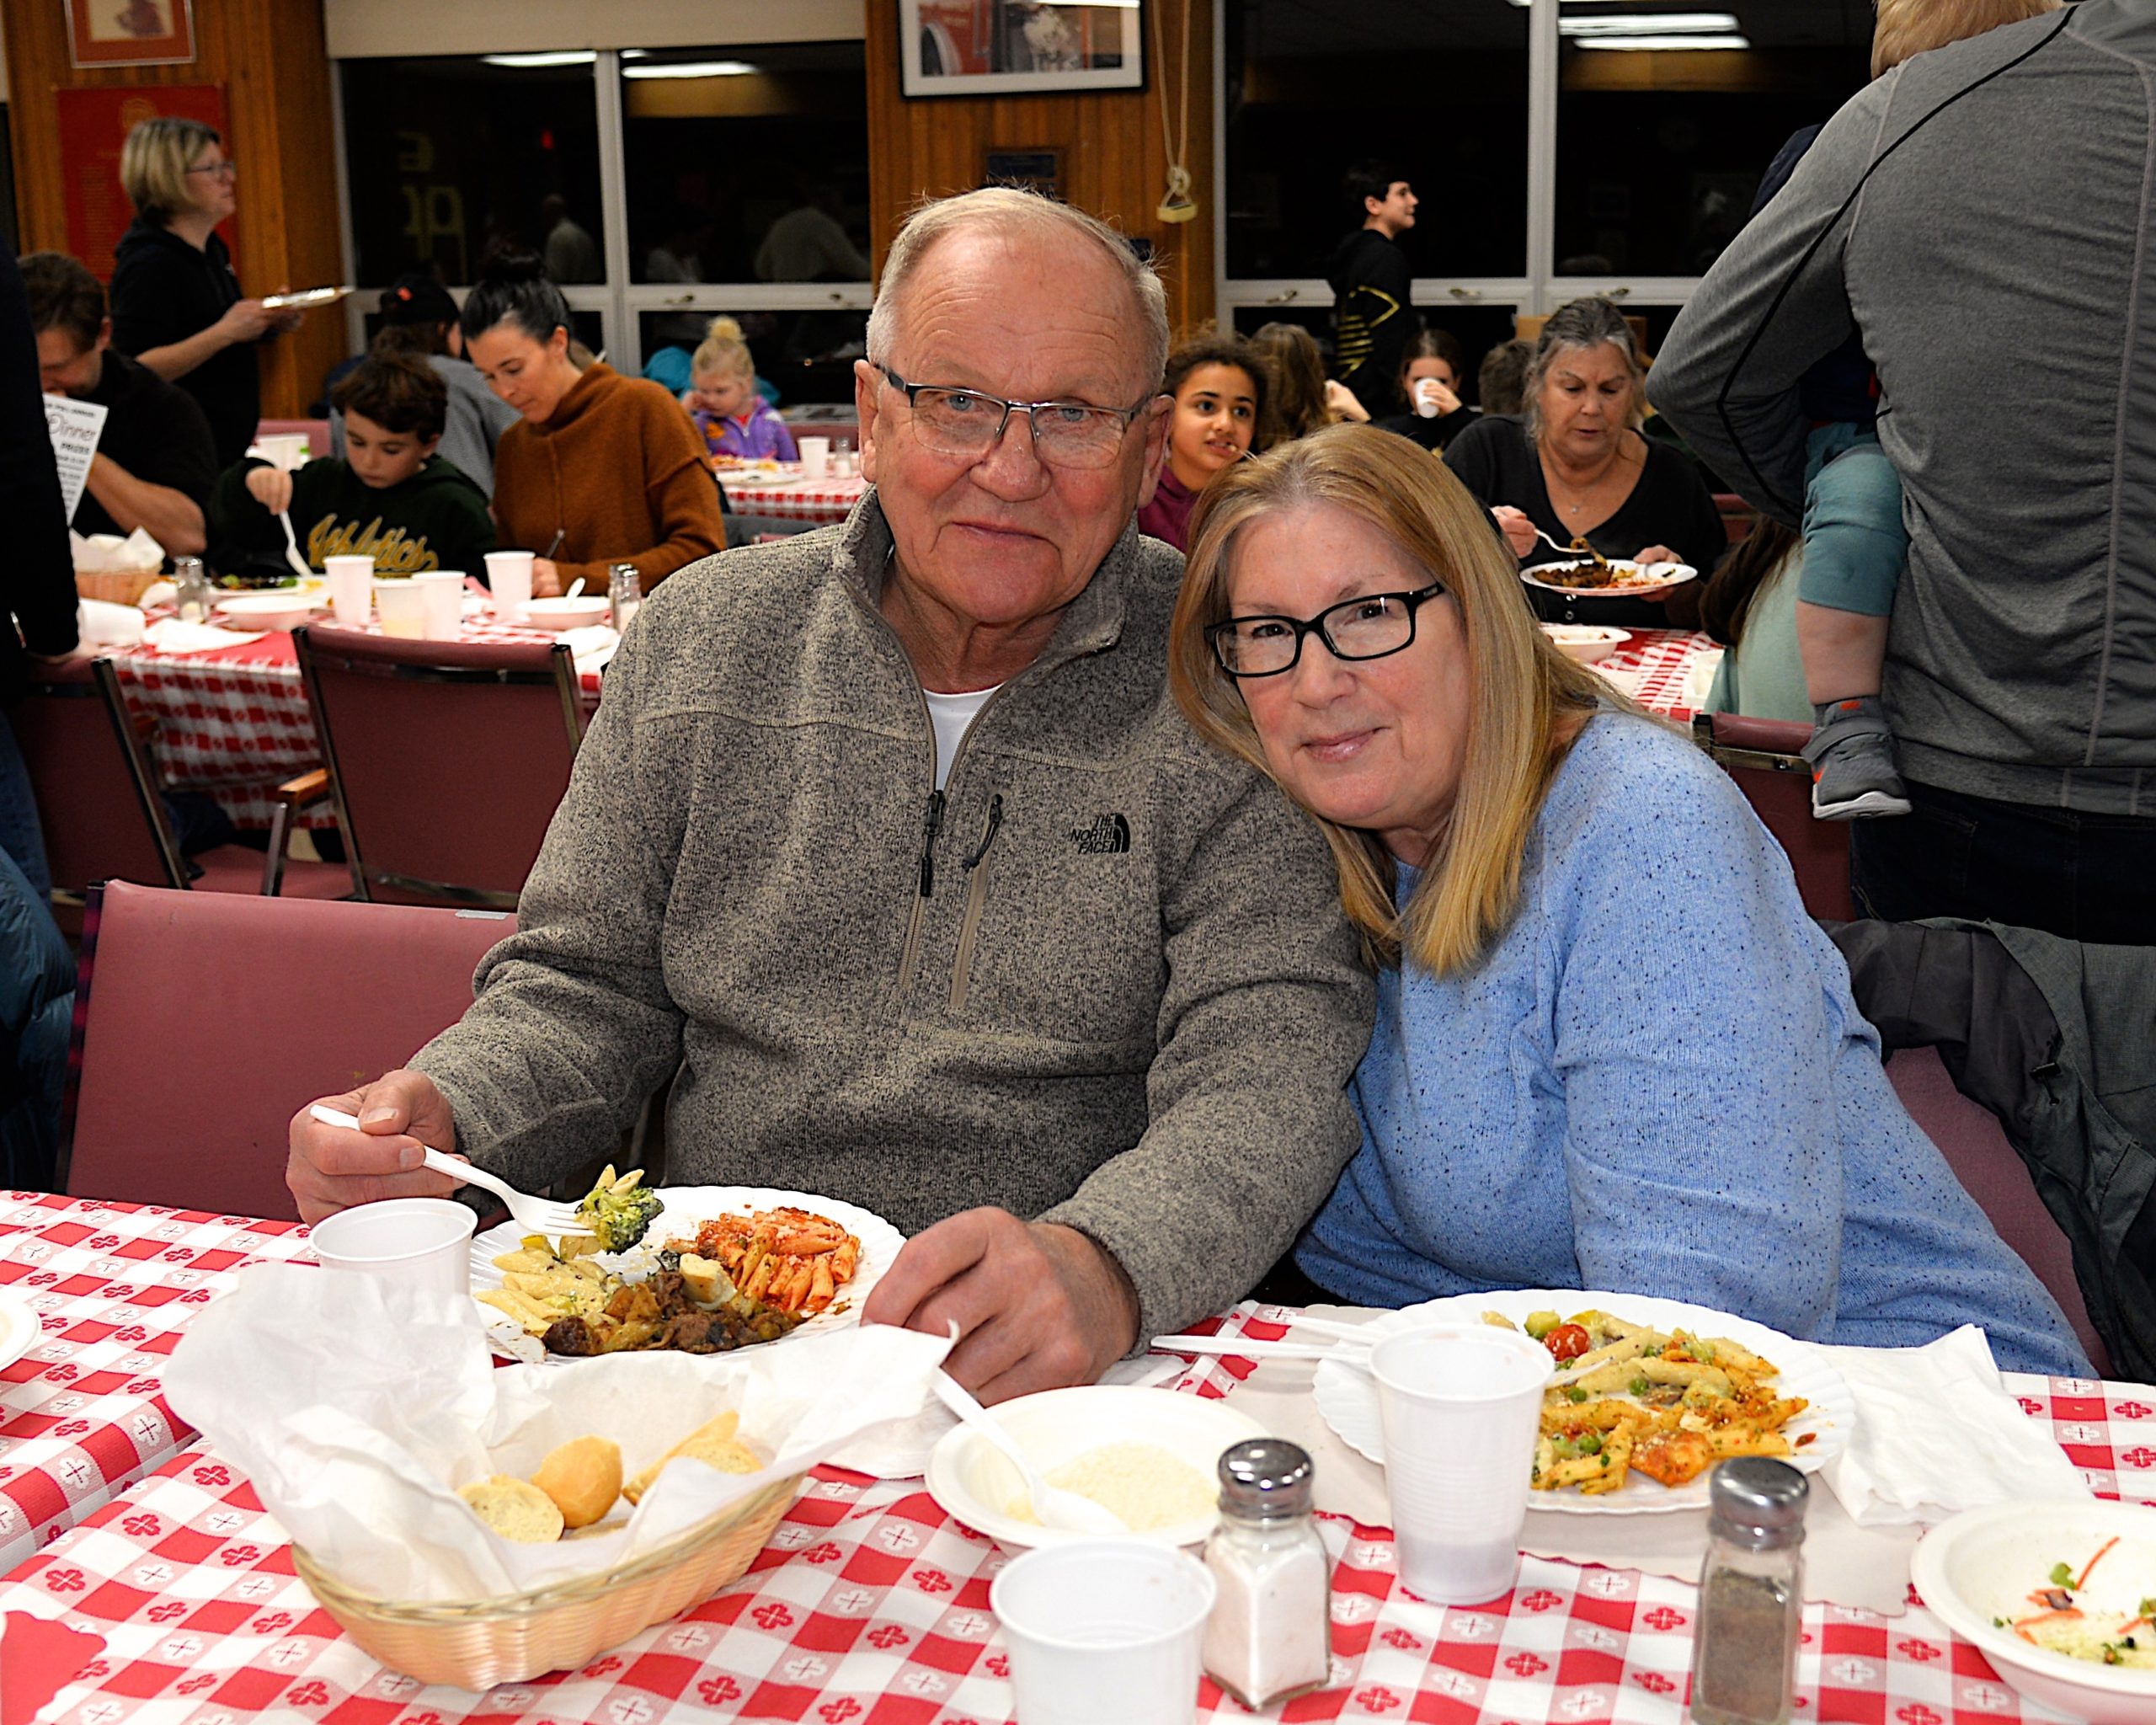 A pasta dinner fundraiser took place at the Montauk firehouse on Saturday to benefit the Robert R. Fisher scholarship fund. Dick Swanson and Nancy Stewart were there to support the cause. KYRIL BROMLEY